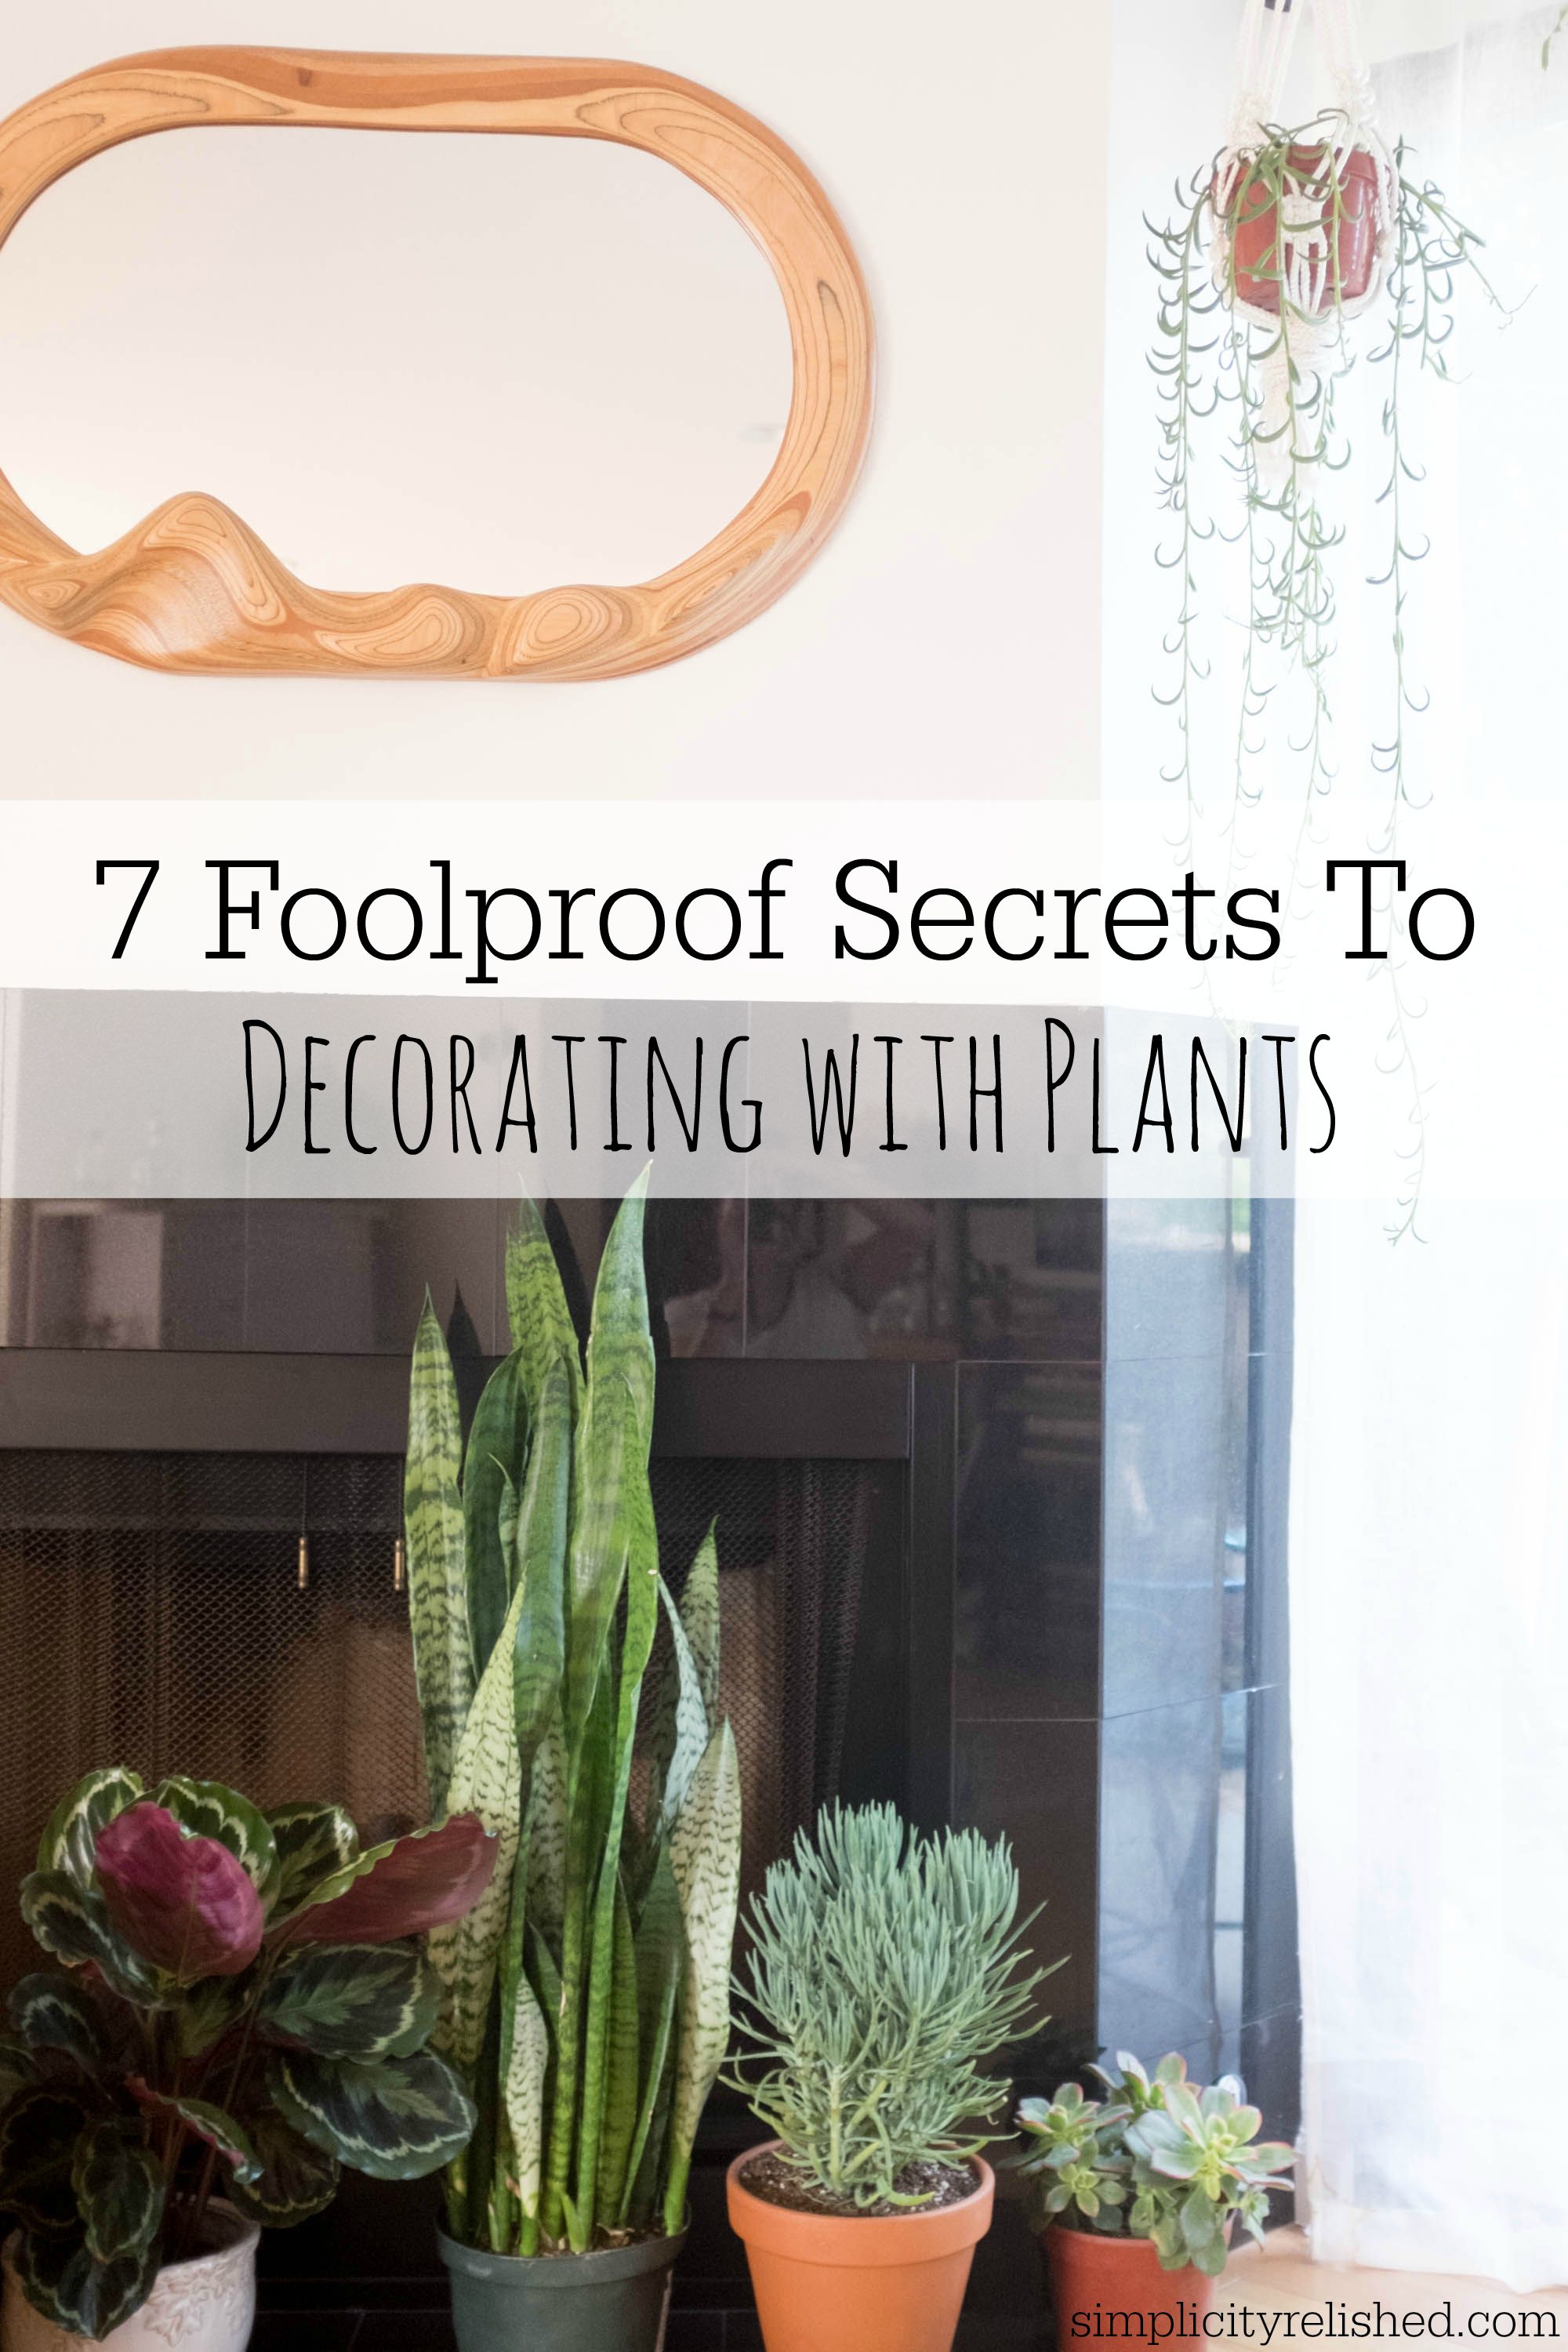 7 Foolproof Secrets To Decorating With Plants | Simplicity Relished